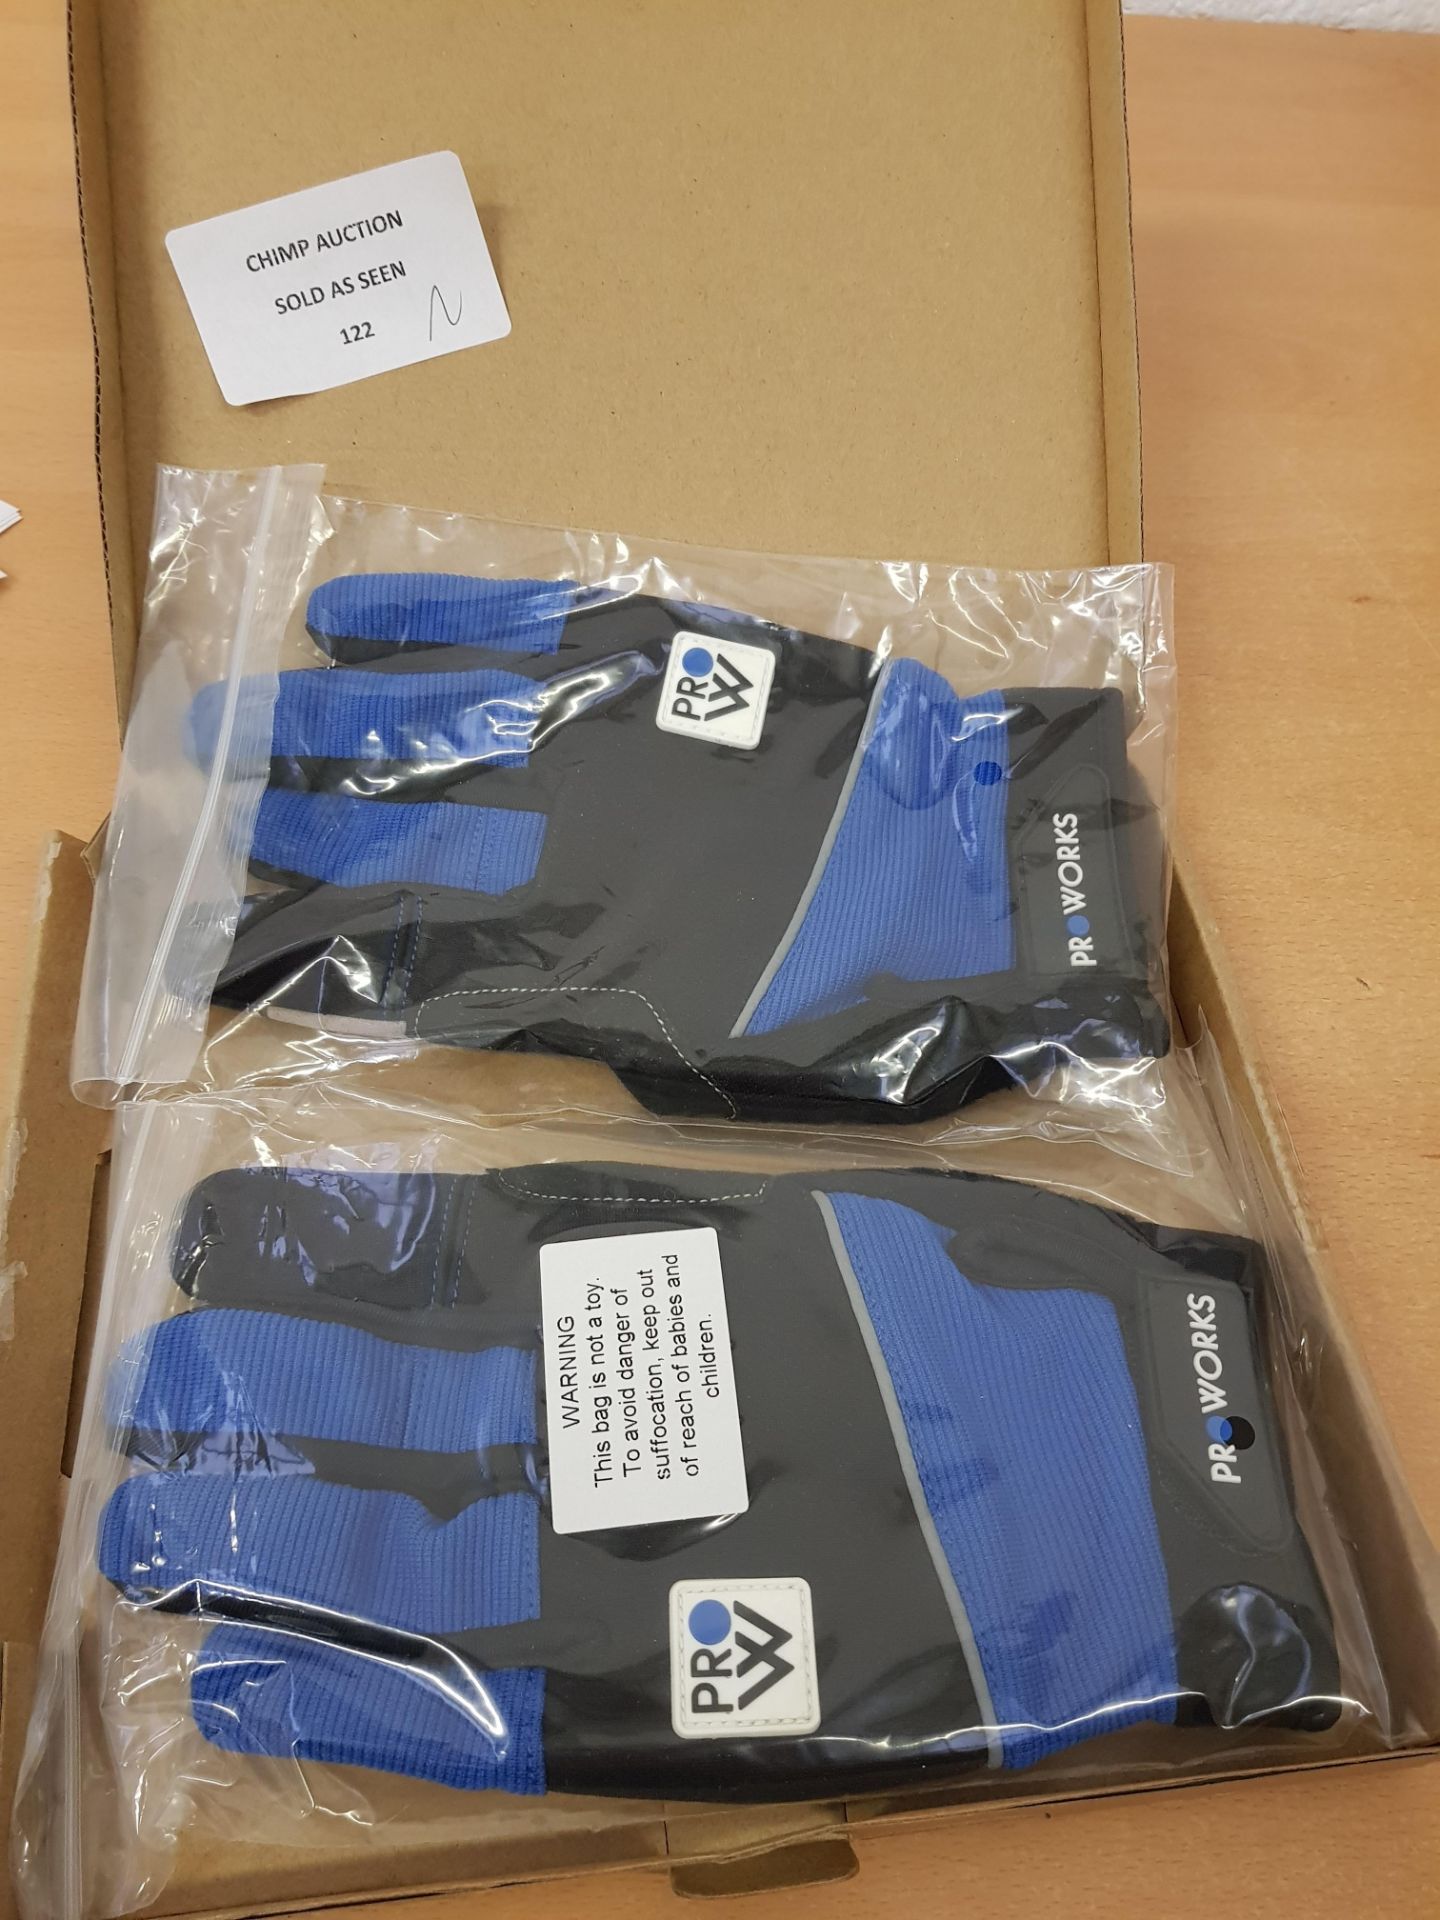 Brand new Proworks Cycling gloves